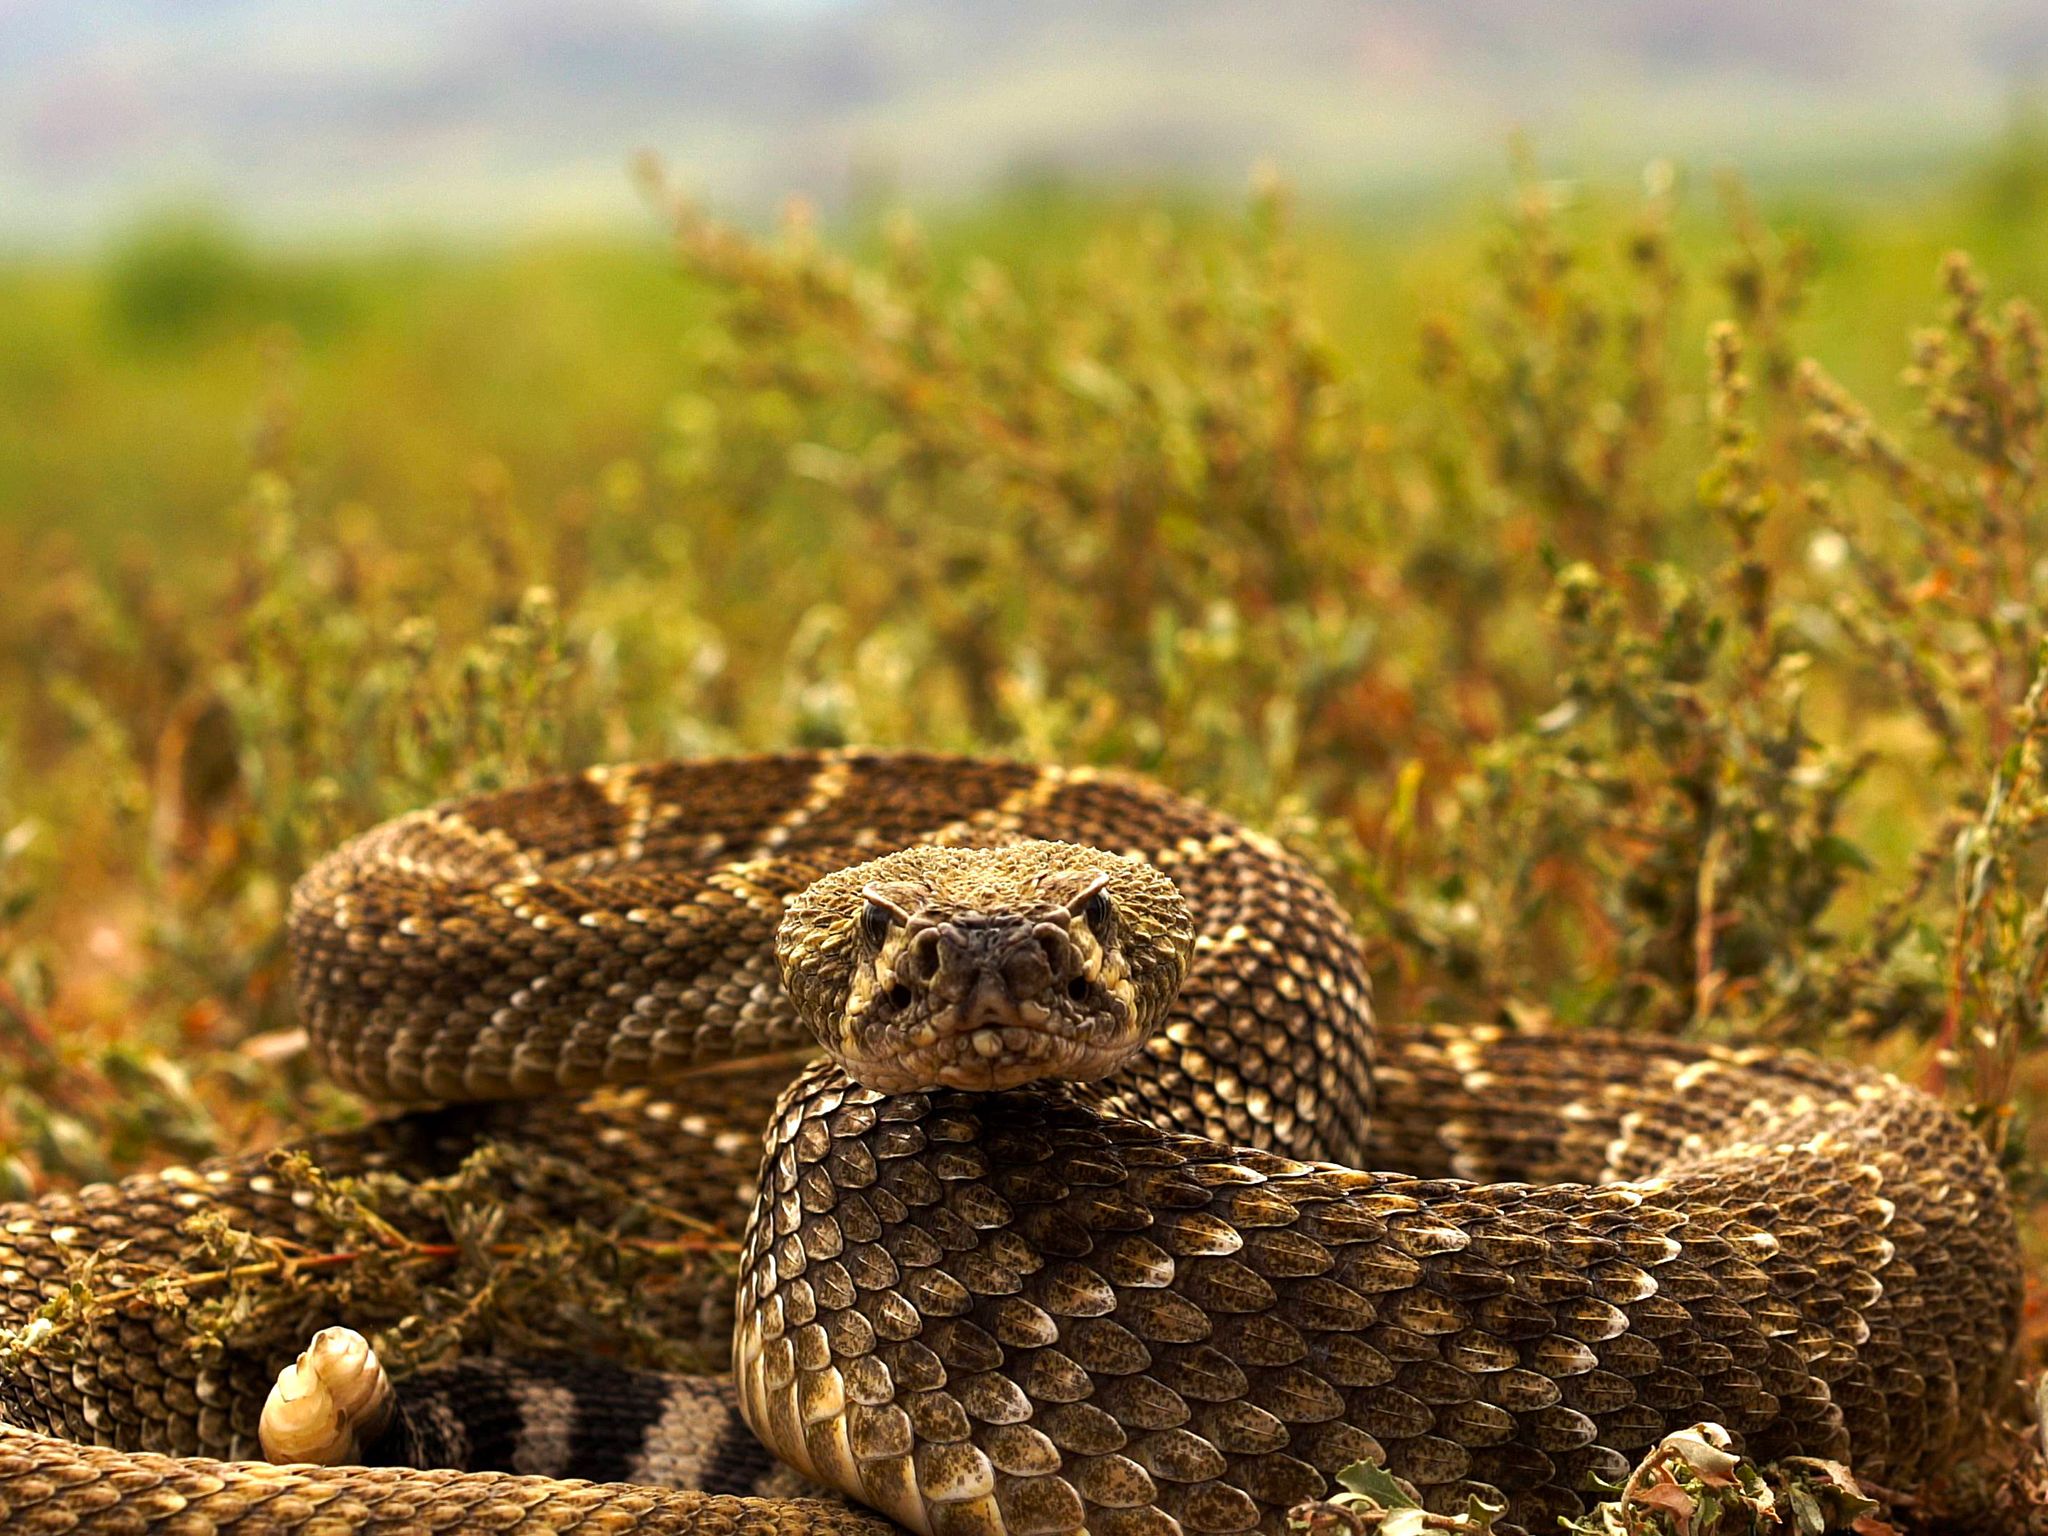 Arizona: Western diamondback rattlesnake in strike pose. This image is from Viper Queens. [Photo of the day - September 2016]